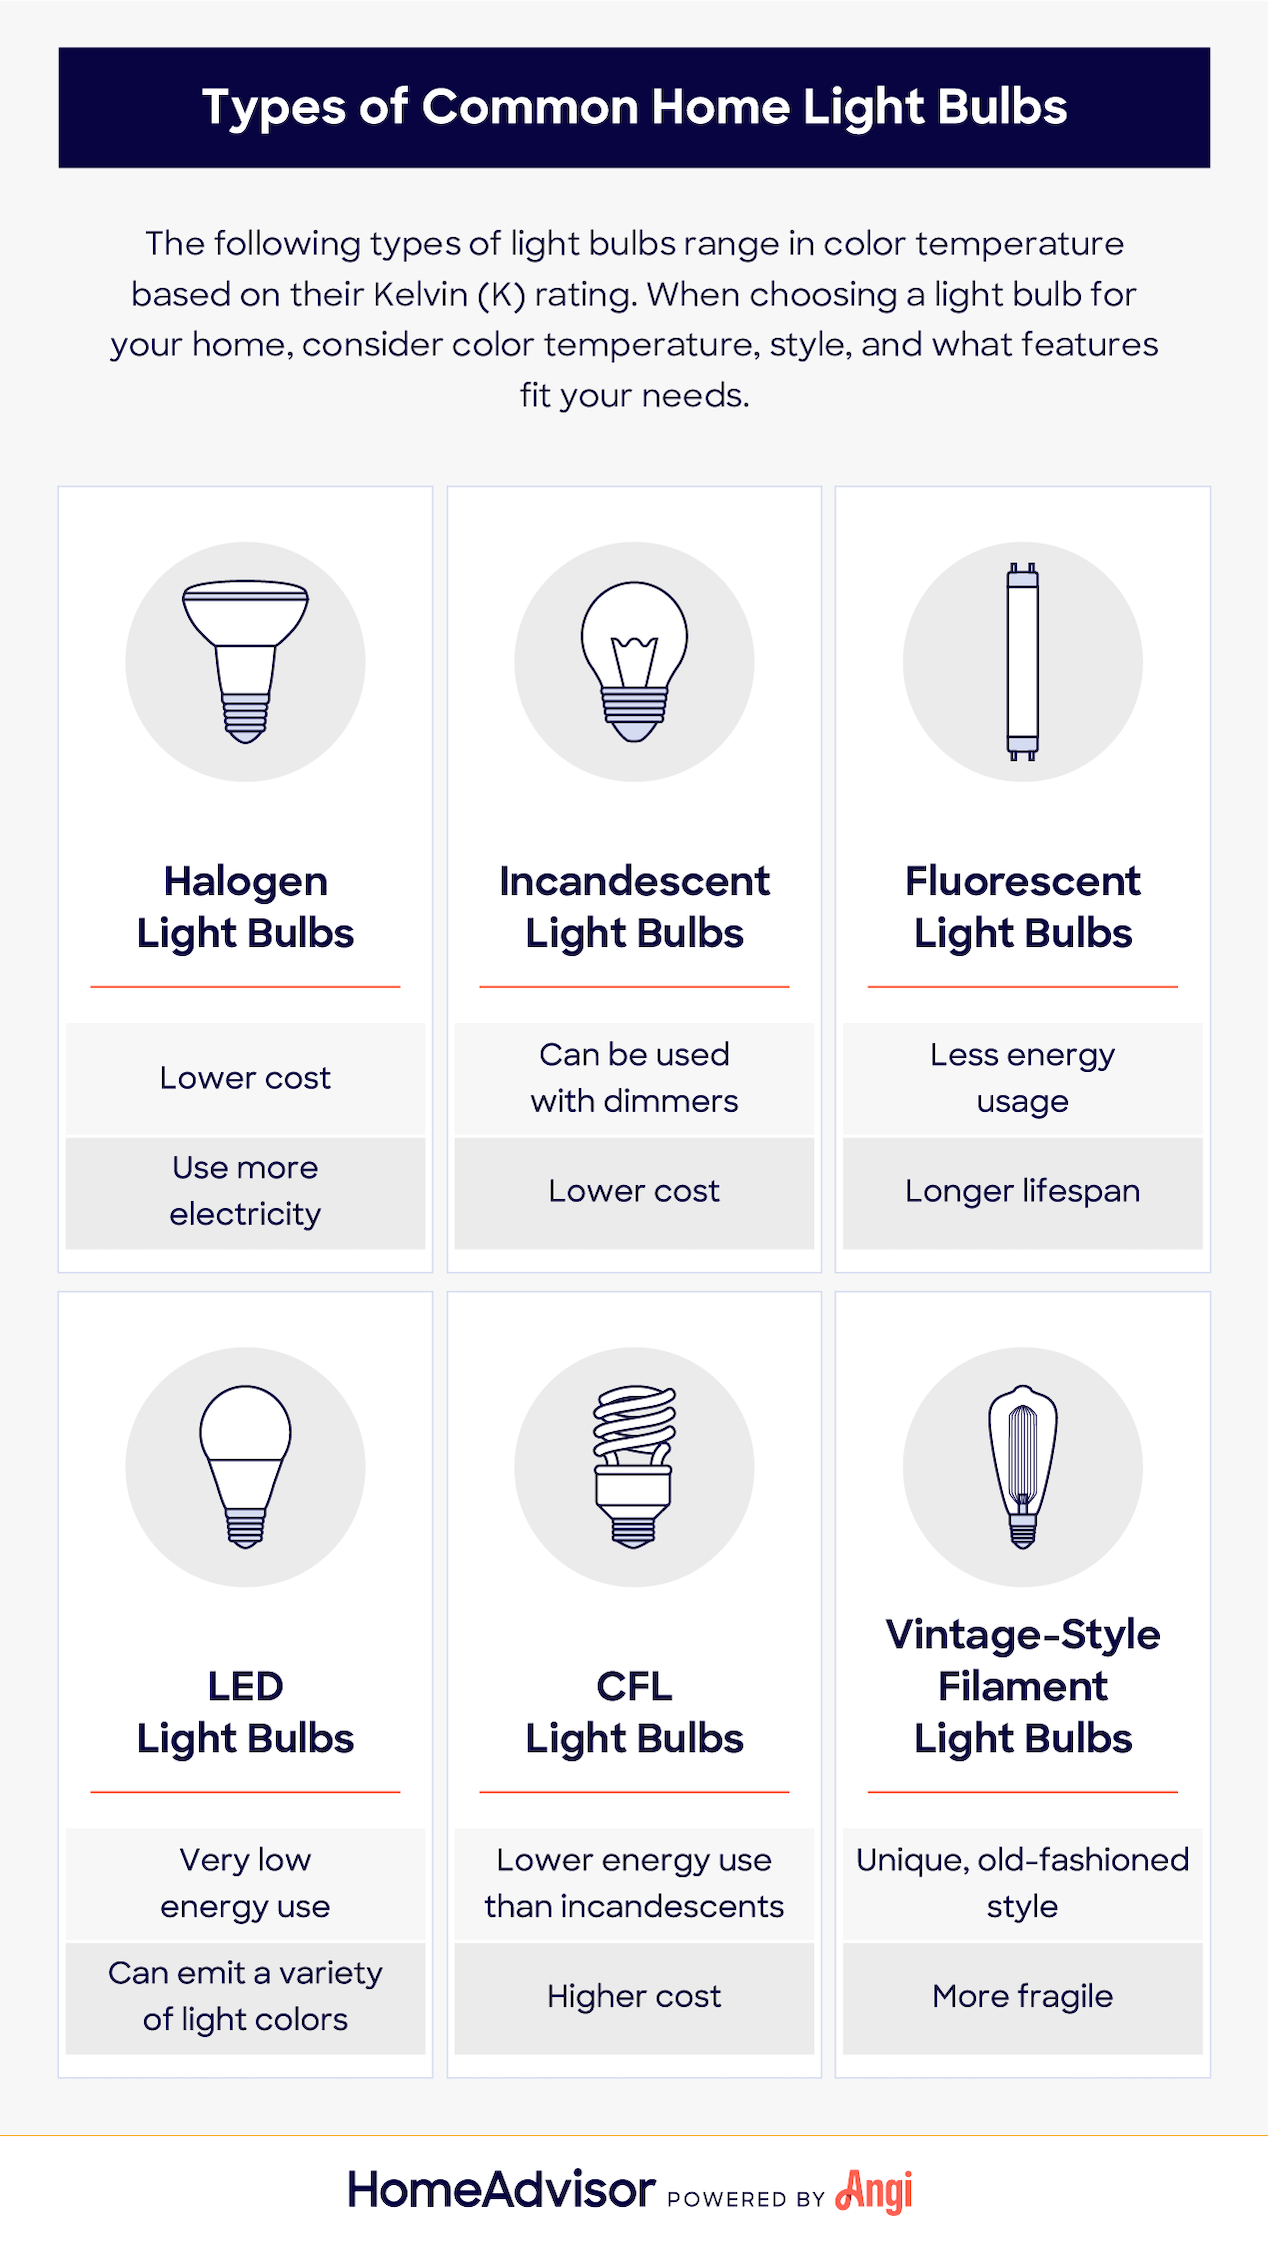 Types of Common Home Light Bulbs